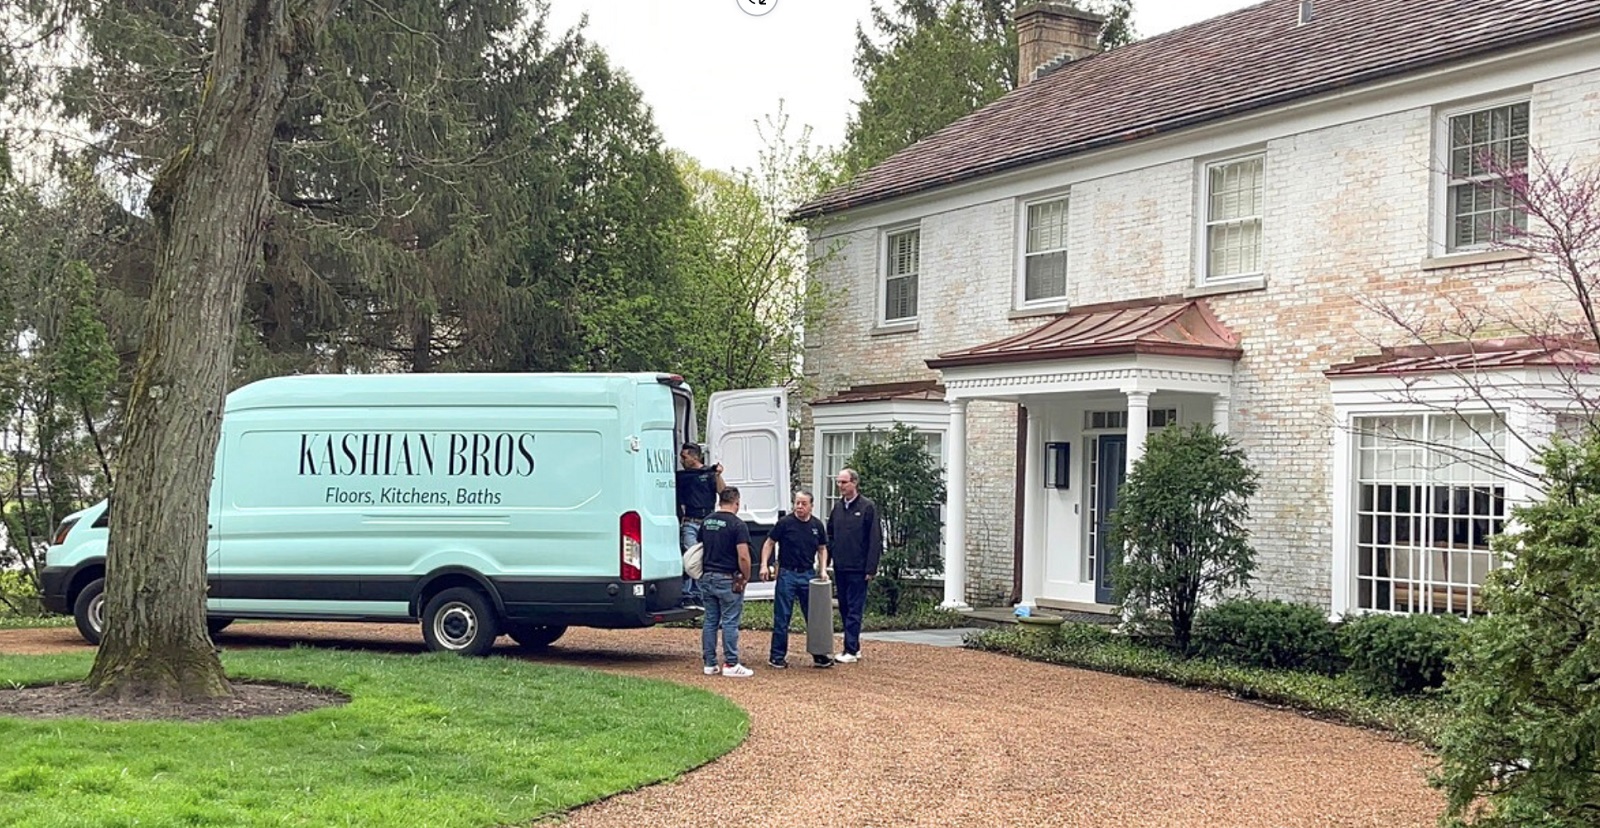 Kashian Bros Pick Up Delivery Service for Your Area Rugs